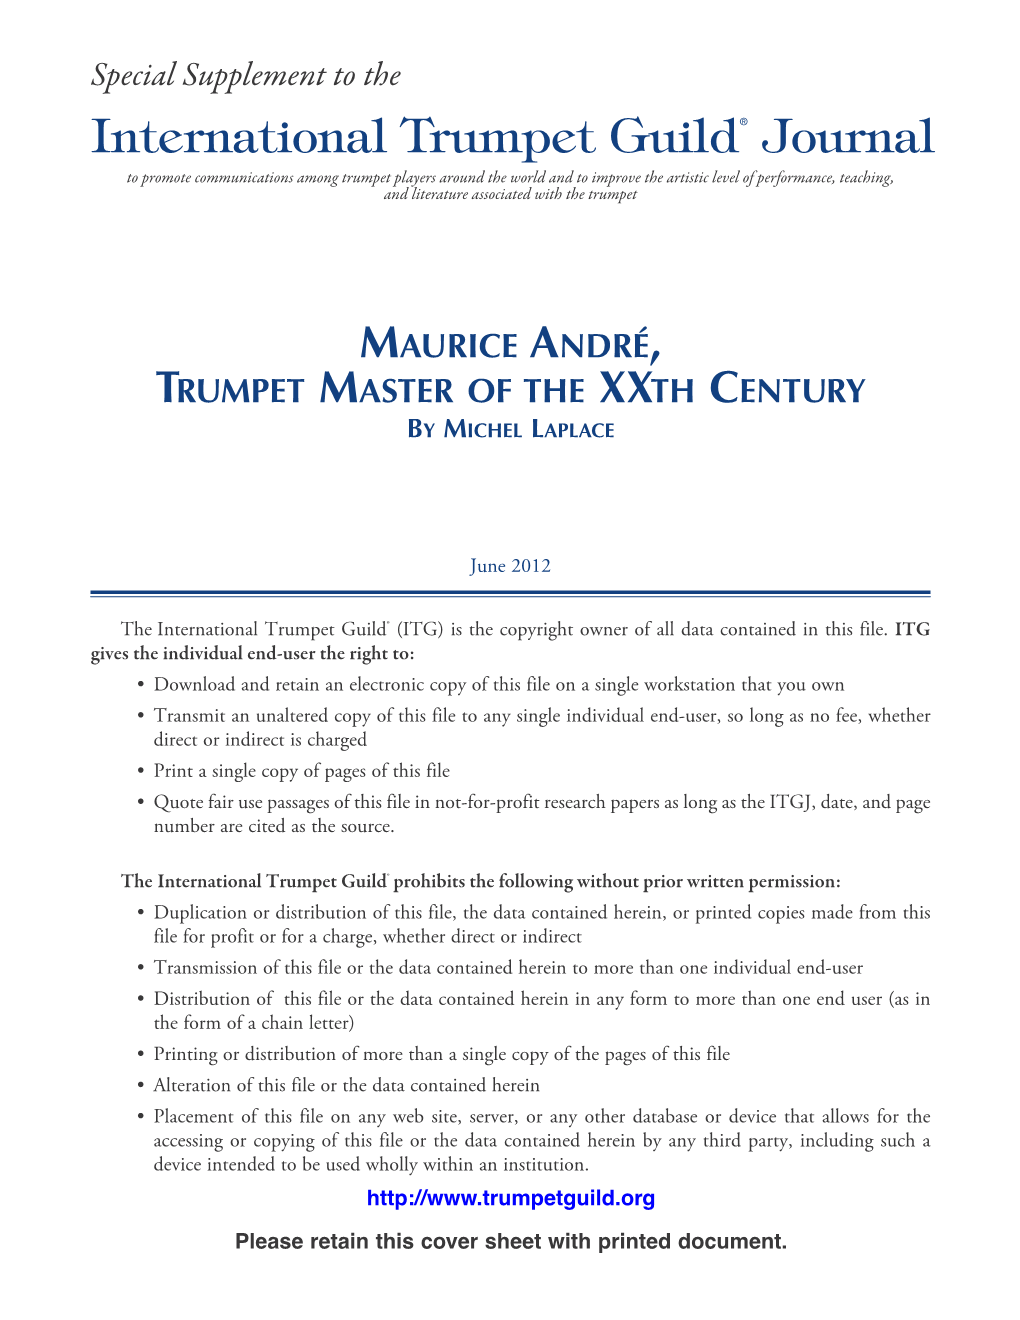 Laplace, Michel: Maurice André, Trumpet Master of the Xxth Century